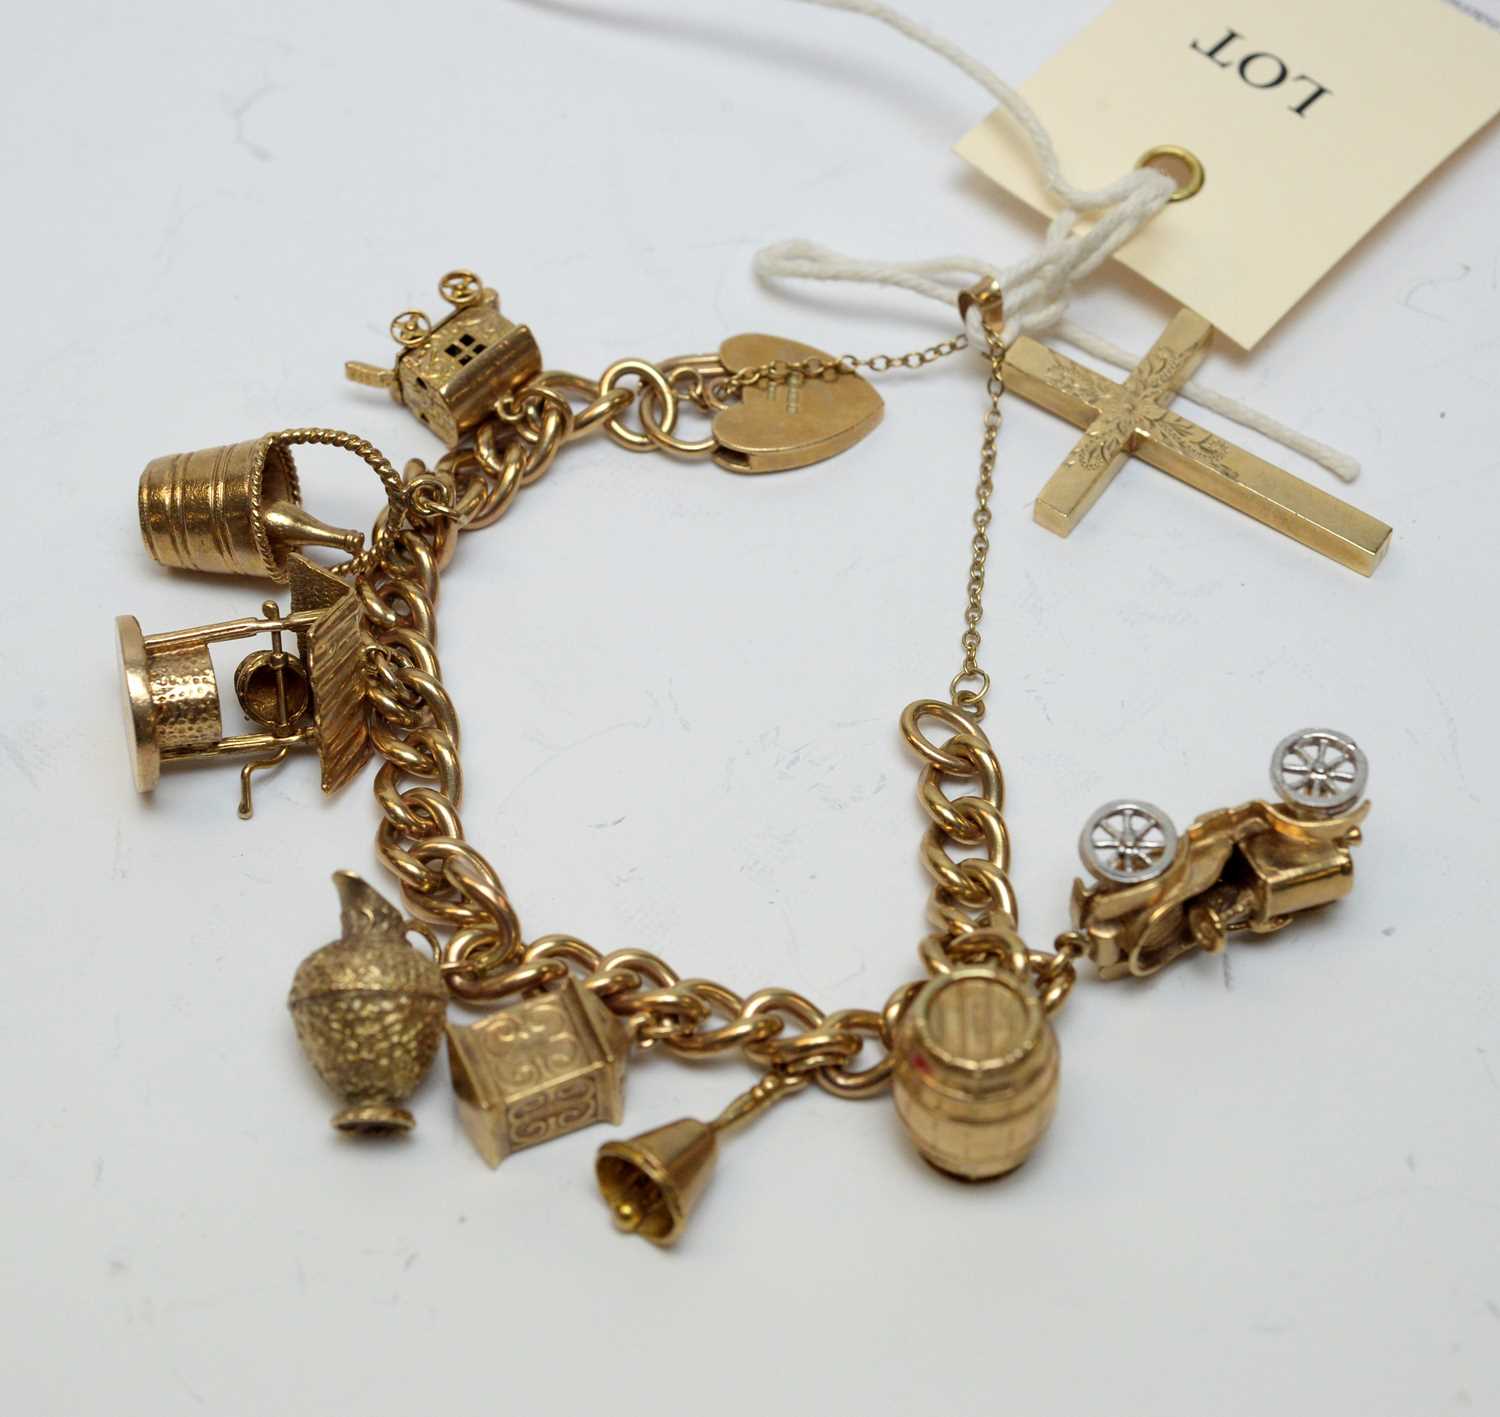 Lot 155 - A 9ct gold charm bracelet and gold charms, and a 9ct gold cruciform pendant.